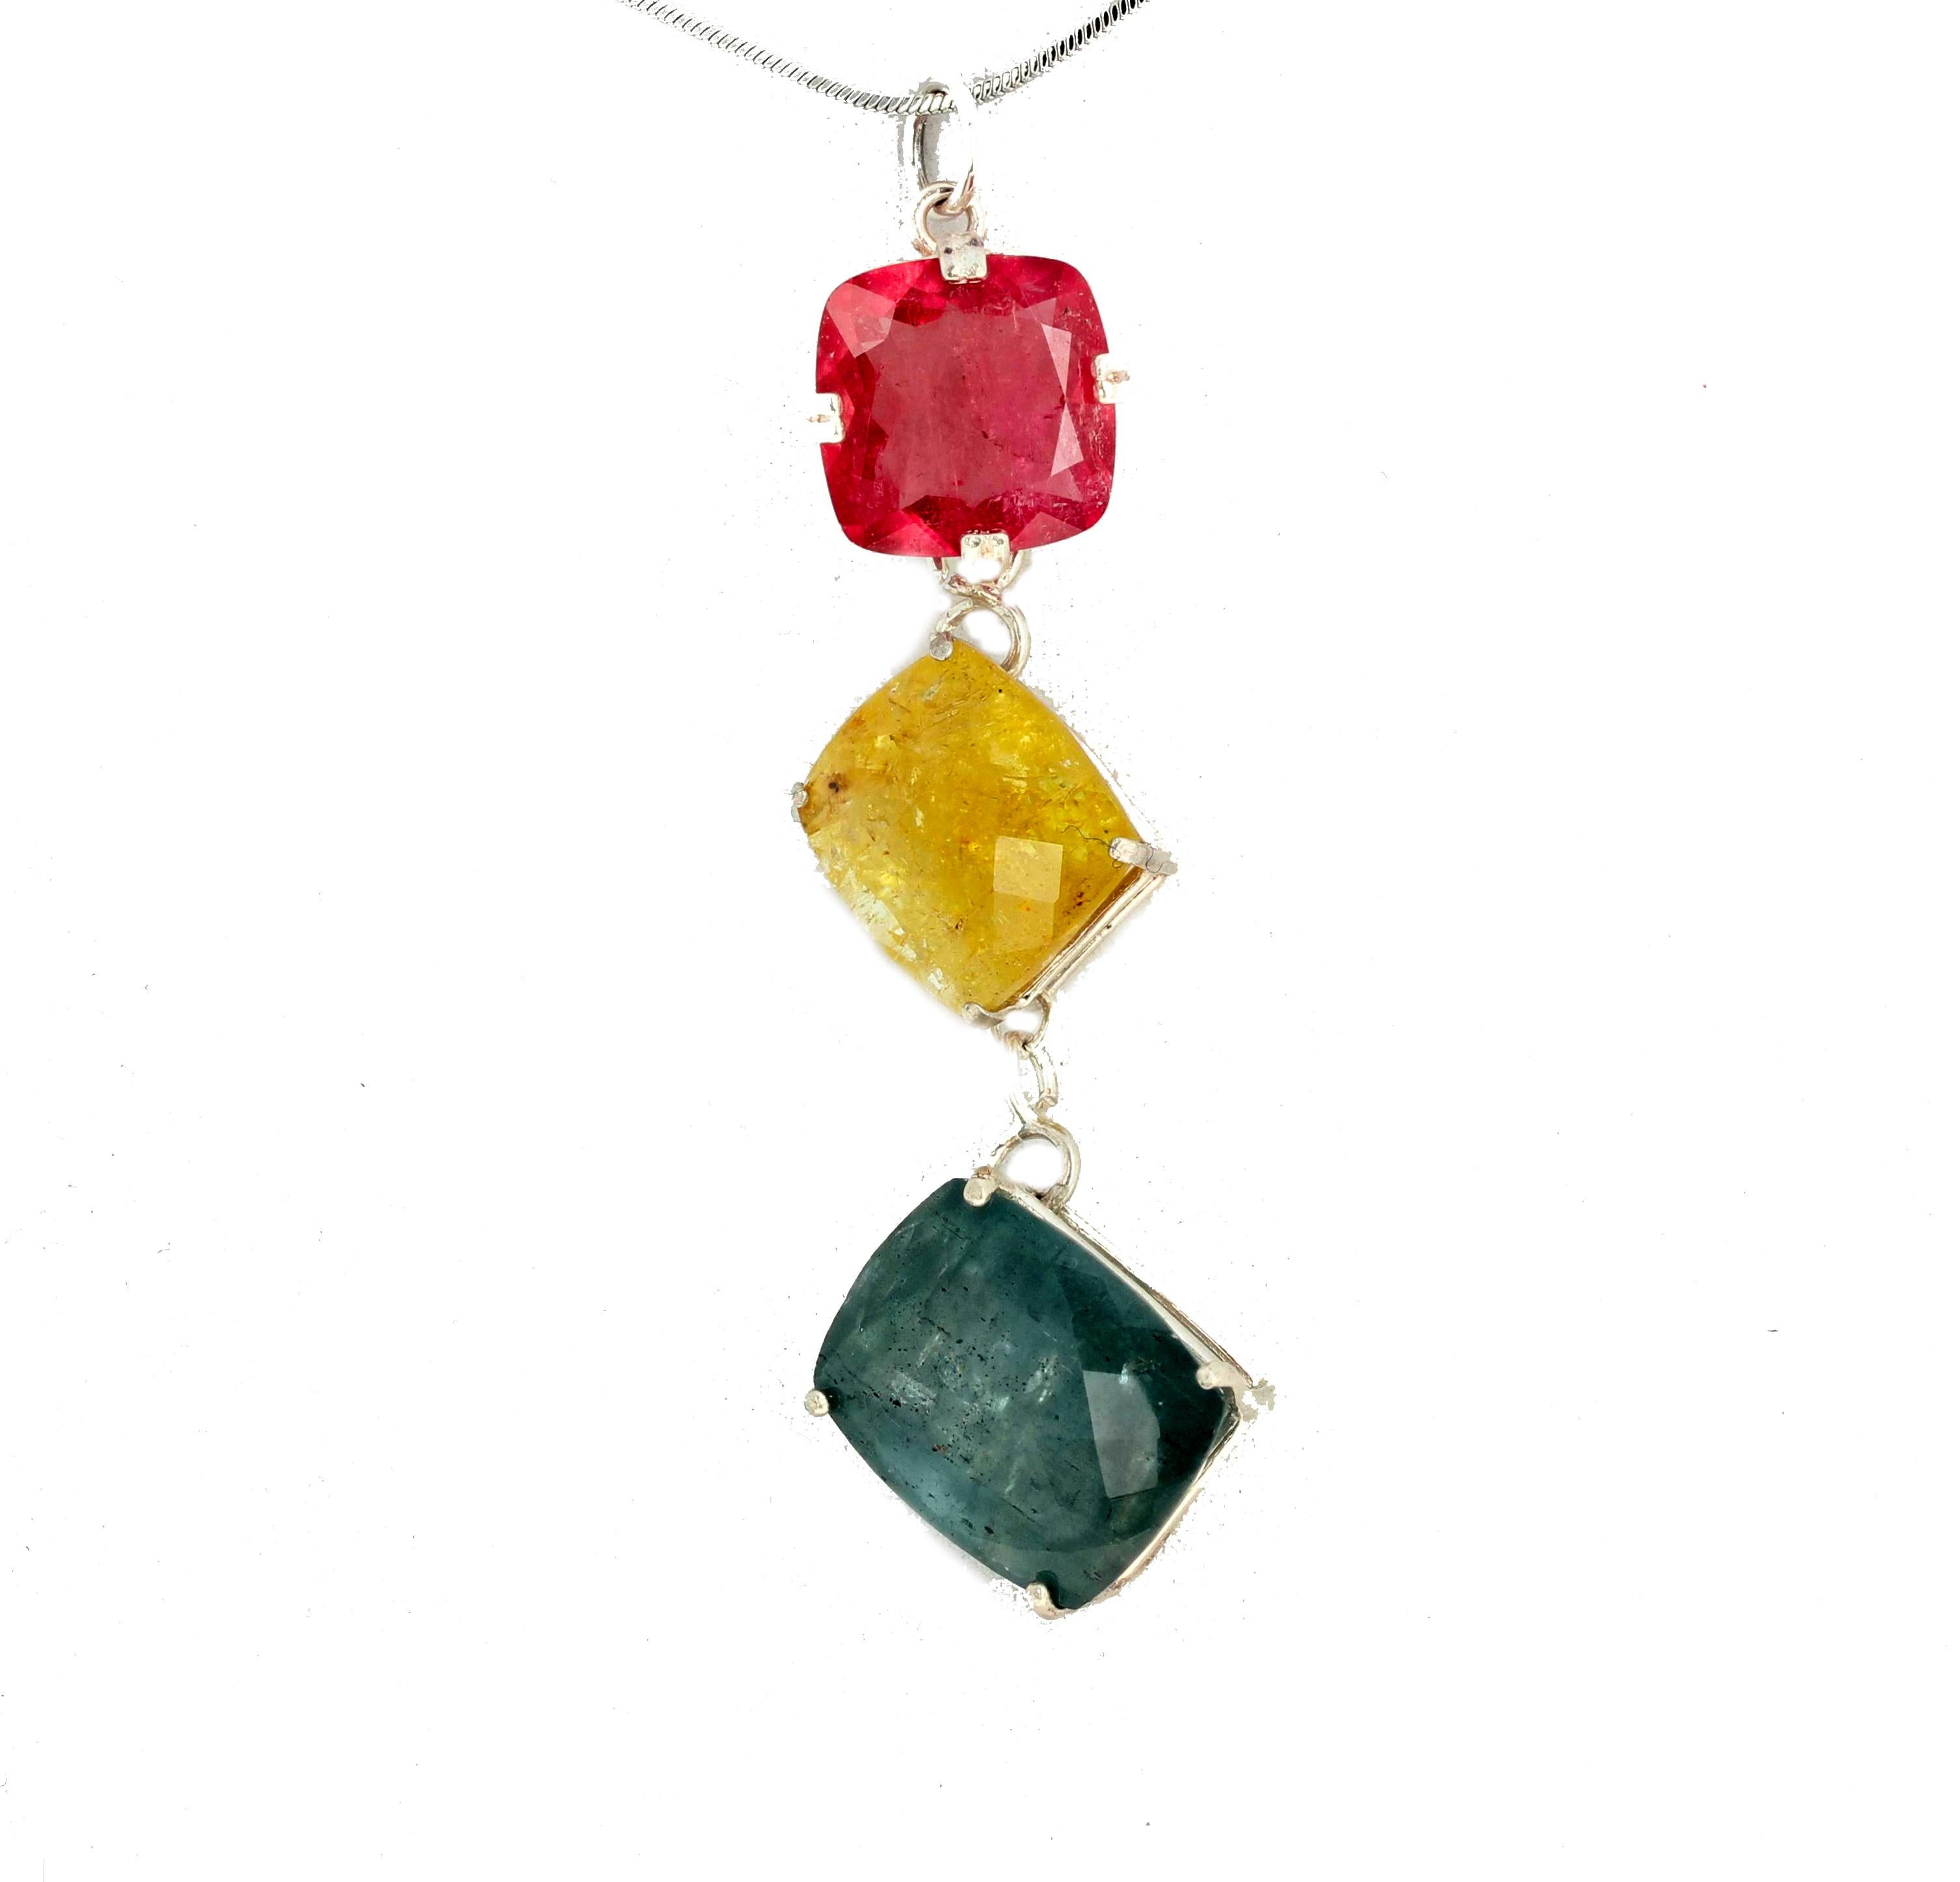 Women's AJD Stunning 47 Cts of Peachy Pink, Yellow, Bluegreen Tourmaline Silver Pendant For Sale